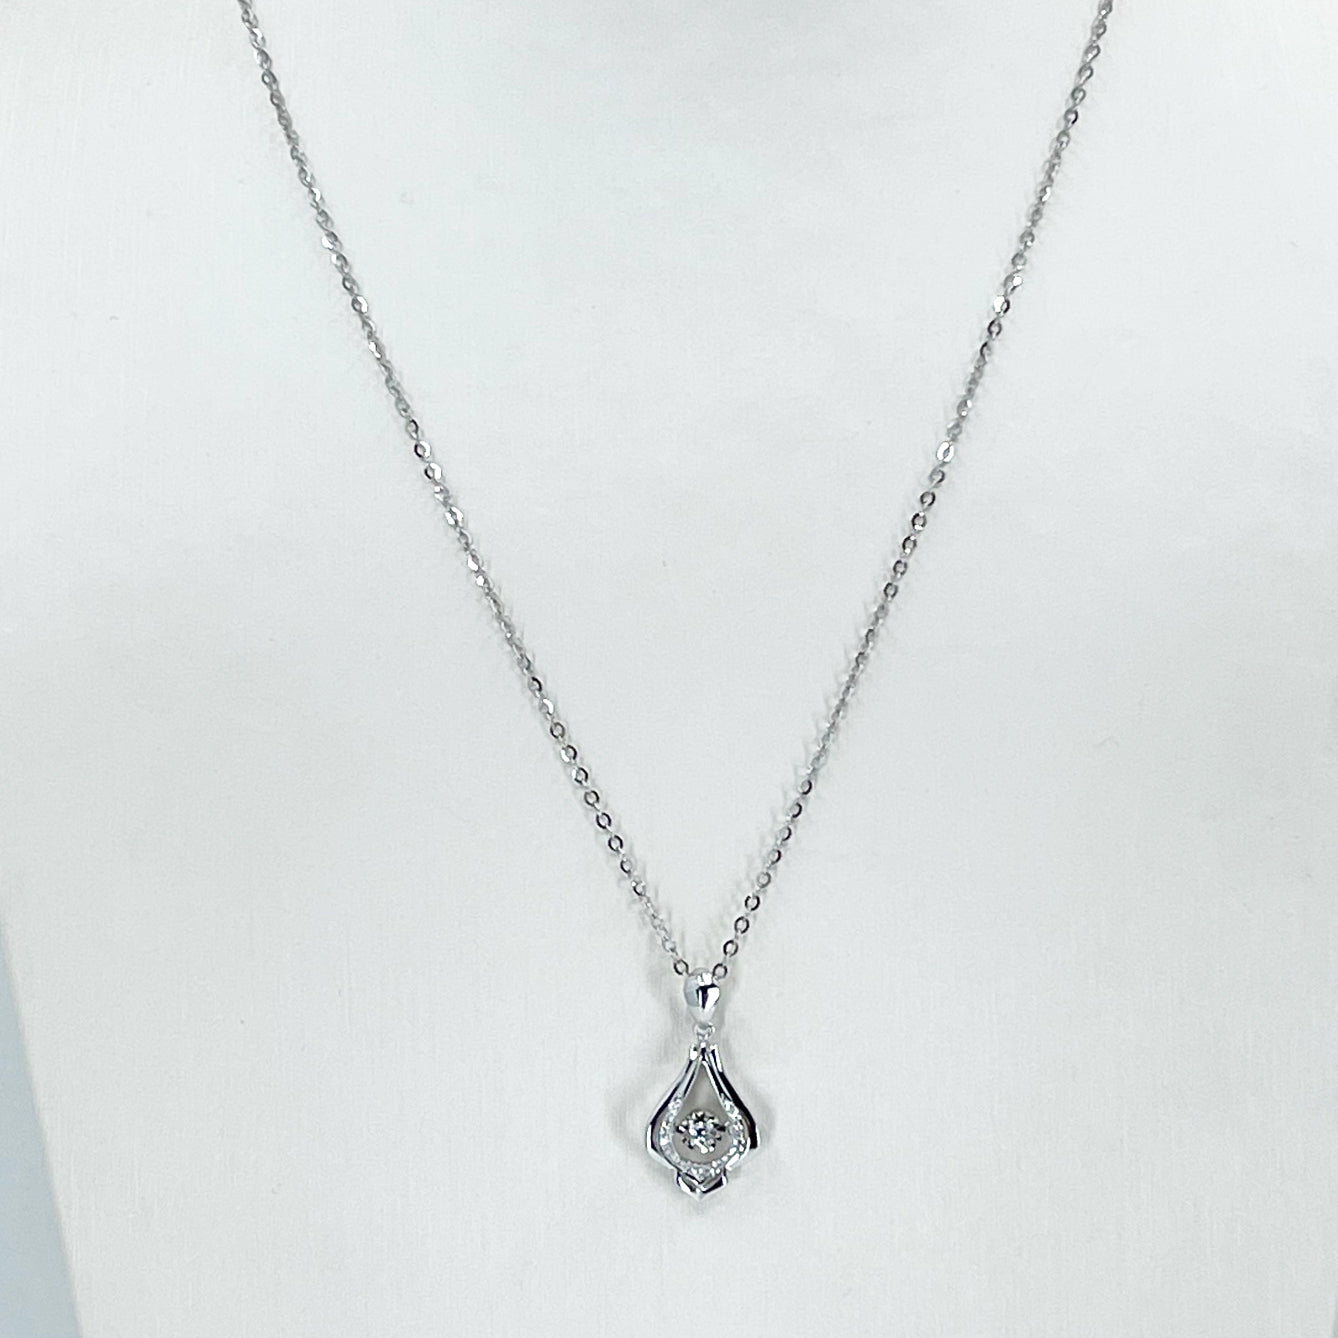 18K Solid White Gold Round Link Chain Necklace with Diamond Pendant 18" D0.035 CT